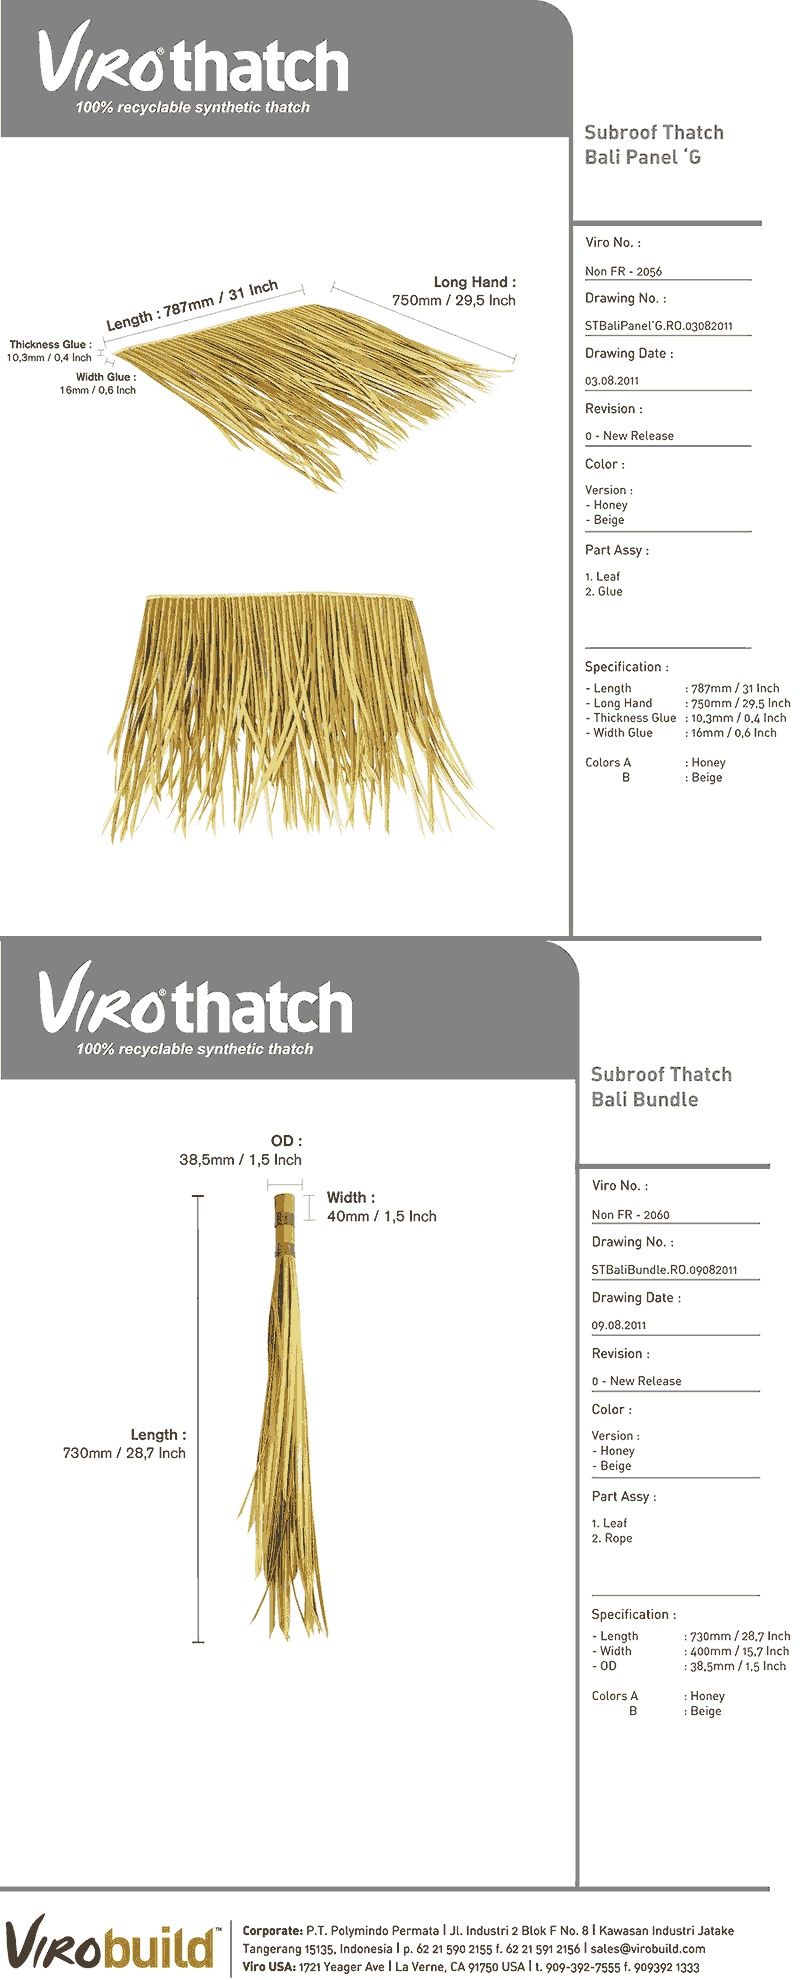 Virothatch Specification